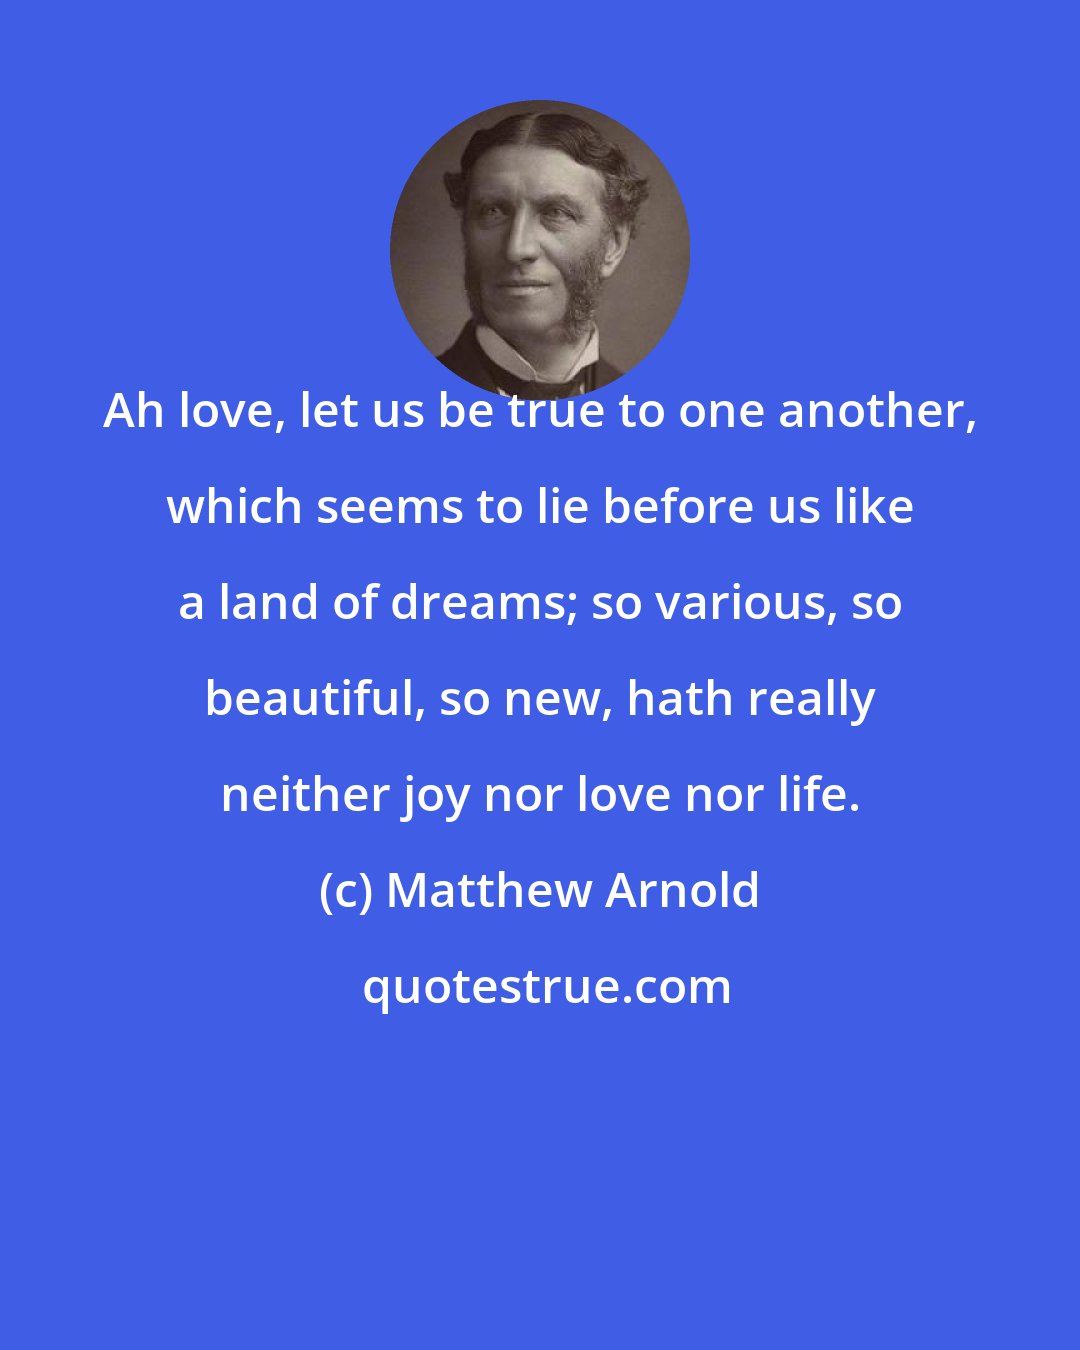 Matthew Arnold: Ah love, let us be true to one another, which seems to lie before us like a land of dreams; so various, so beautiful, so new, hath really neither joy nor love nor life.